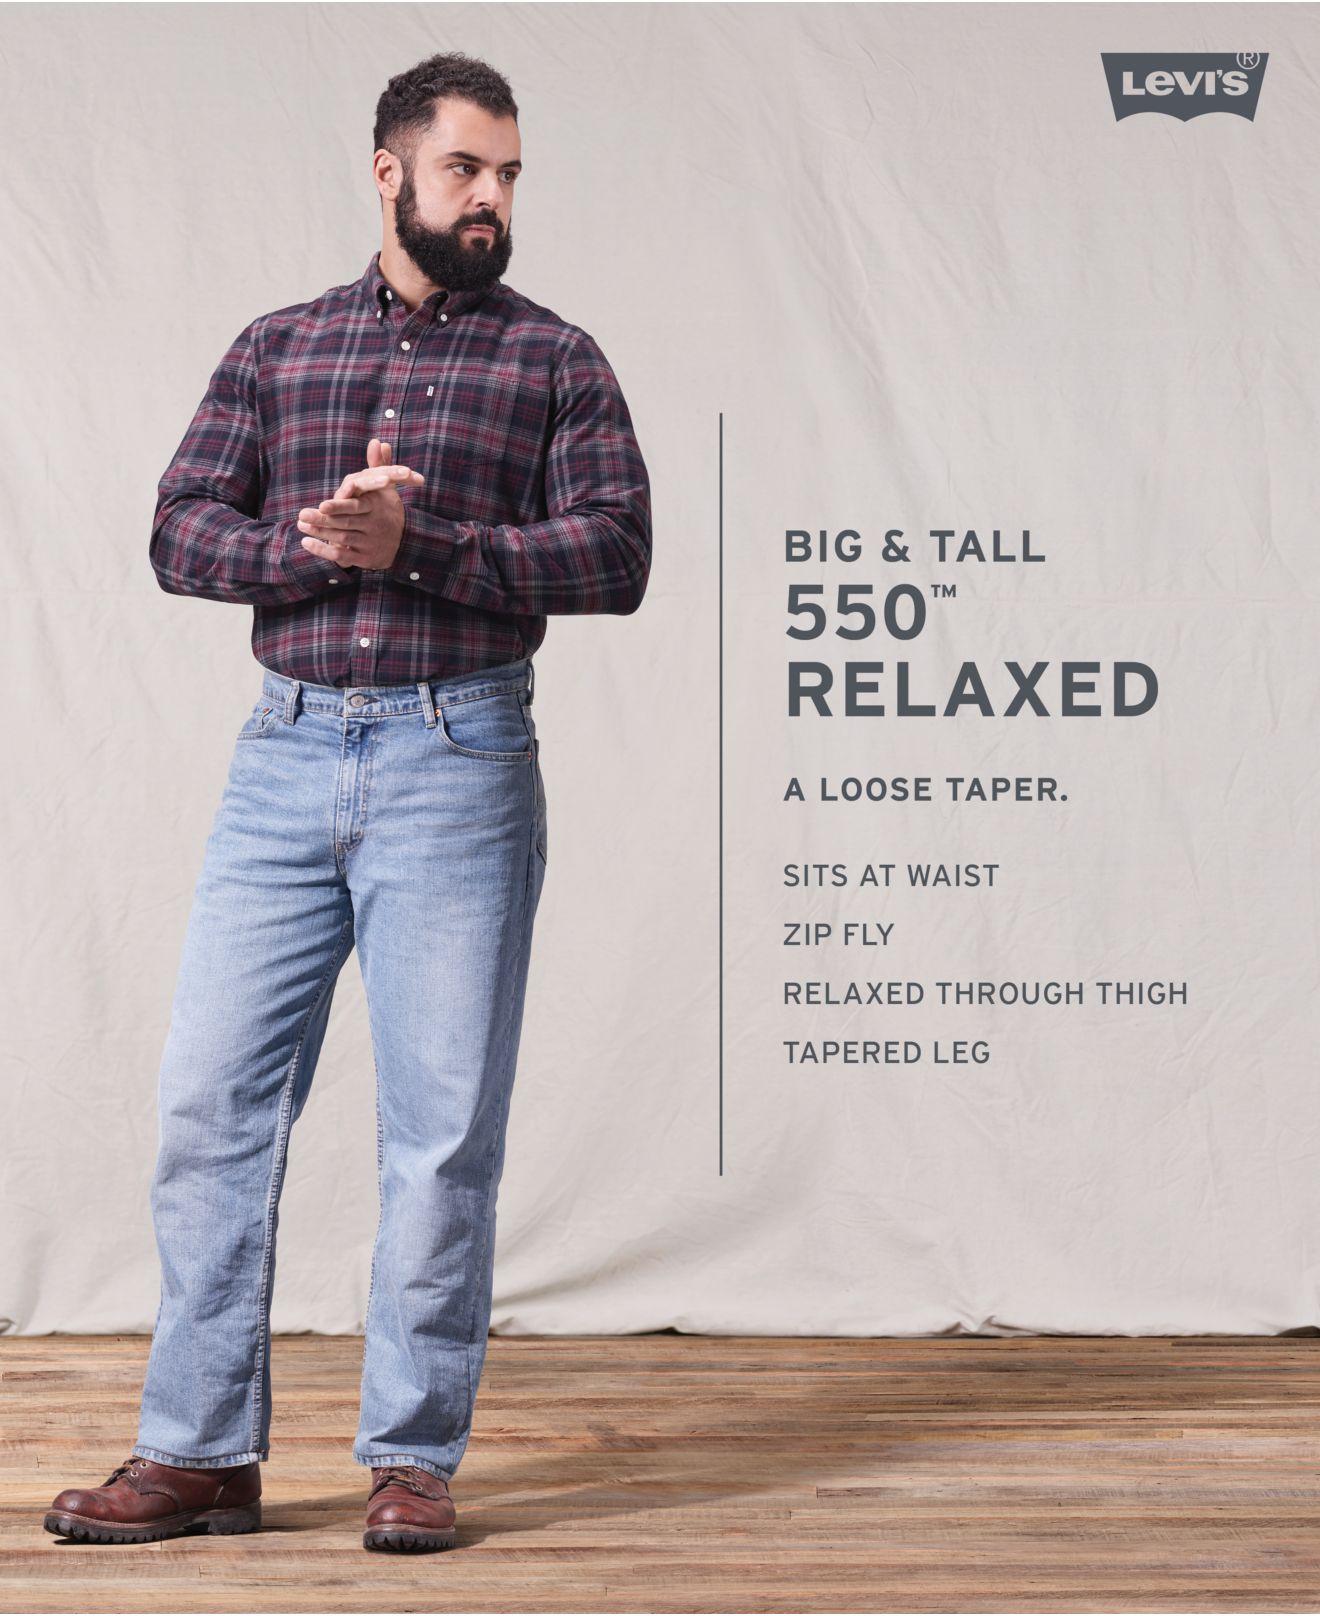 levis 550 big and tall